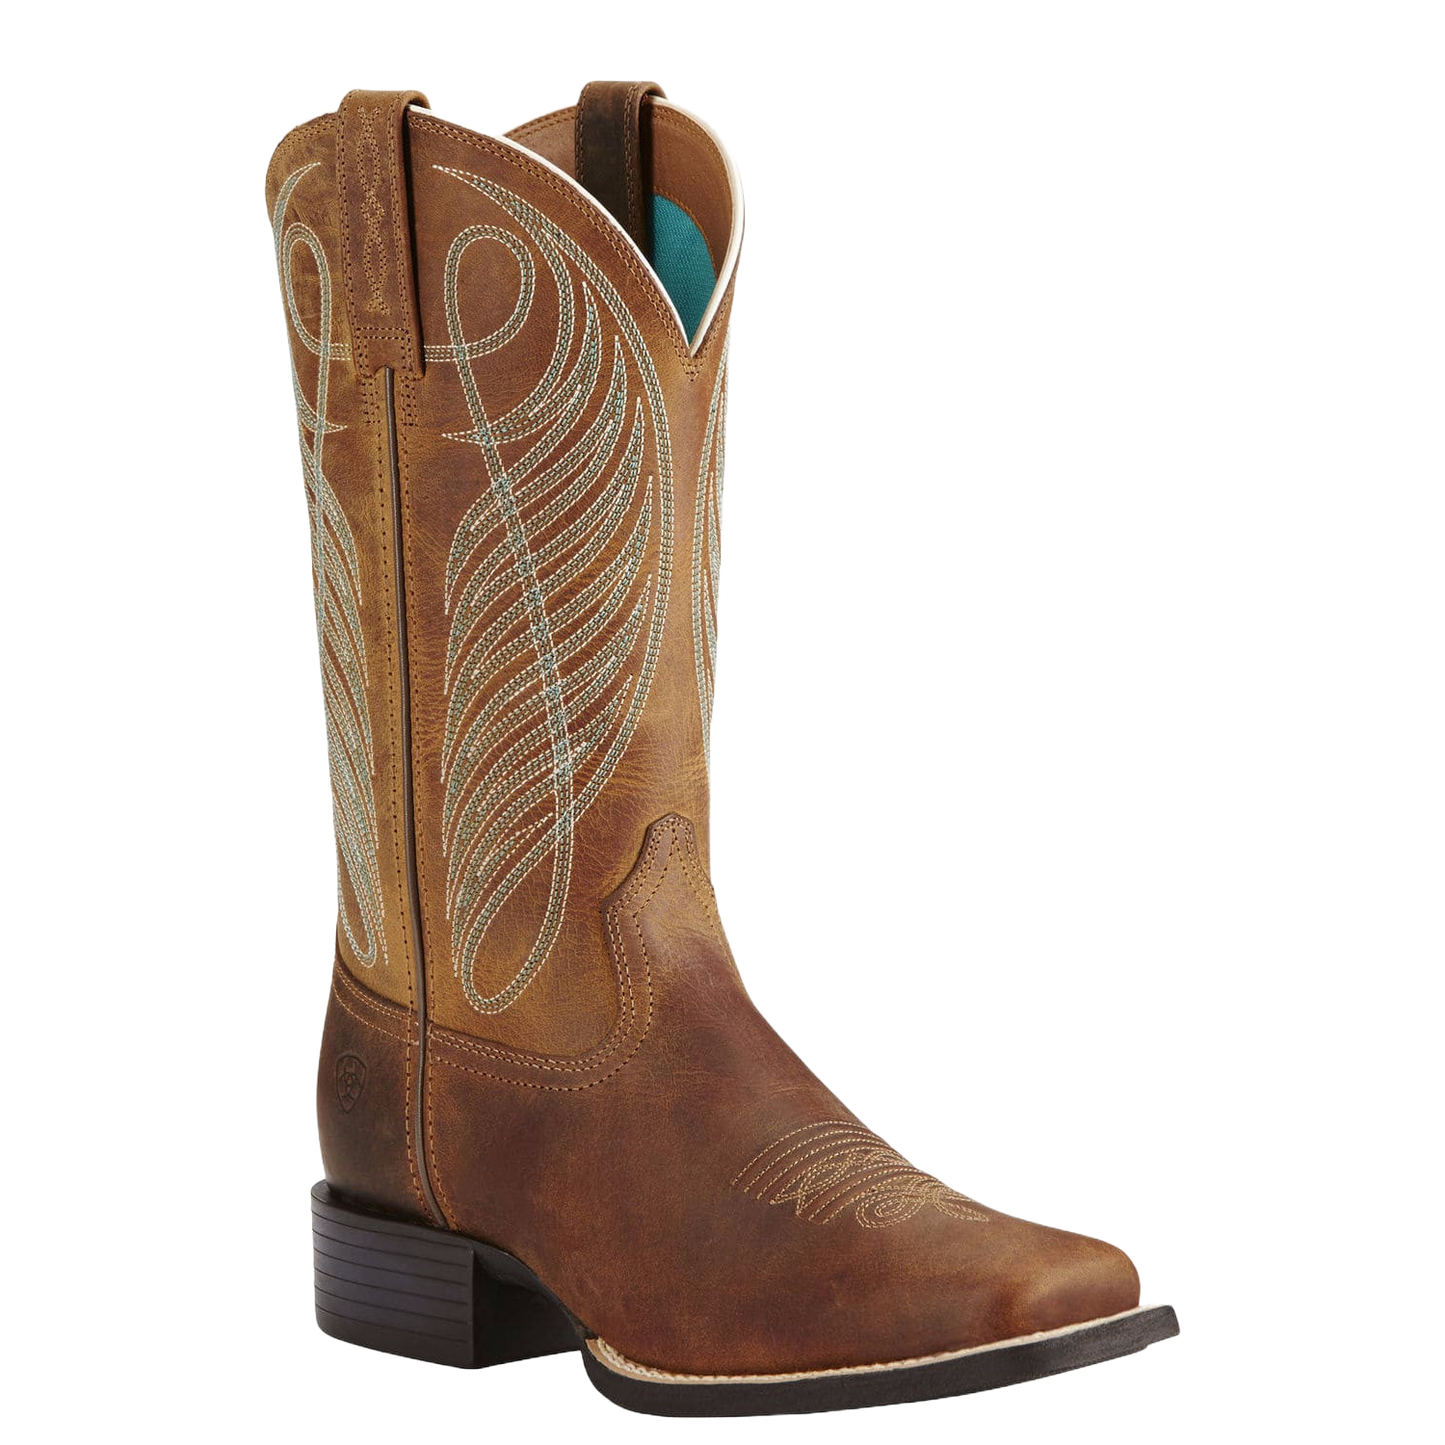 Ariat Ladies Round Up Wide Square Toe Powder Brown Boots 10018528